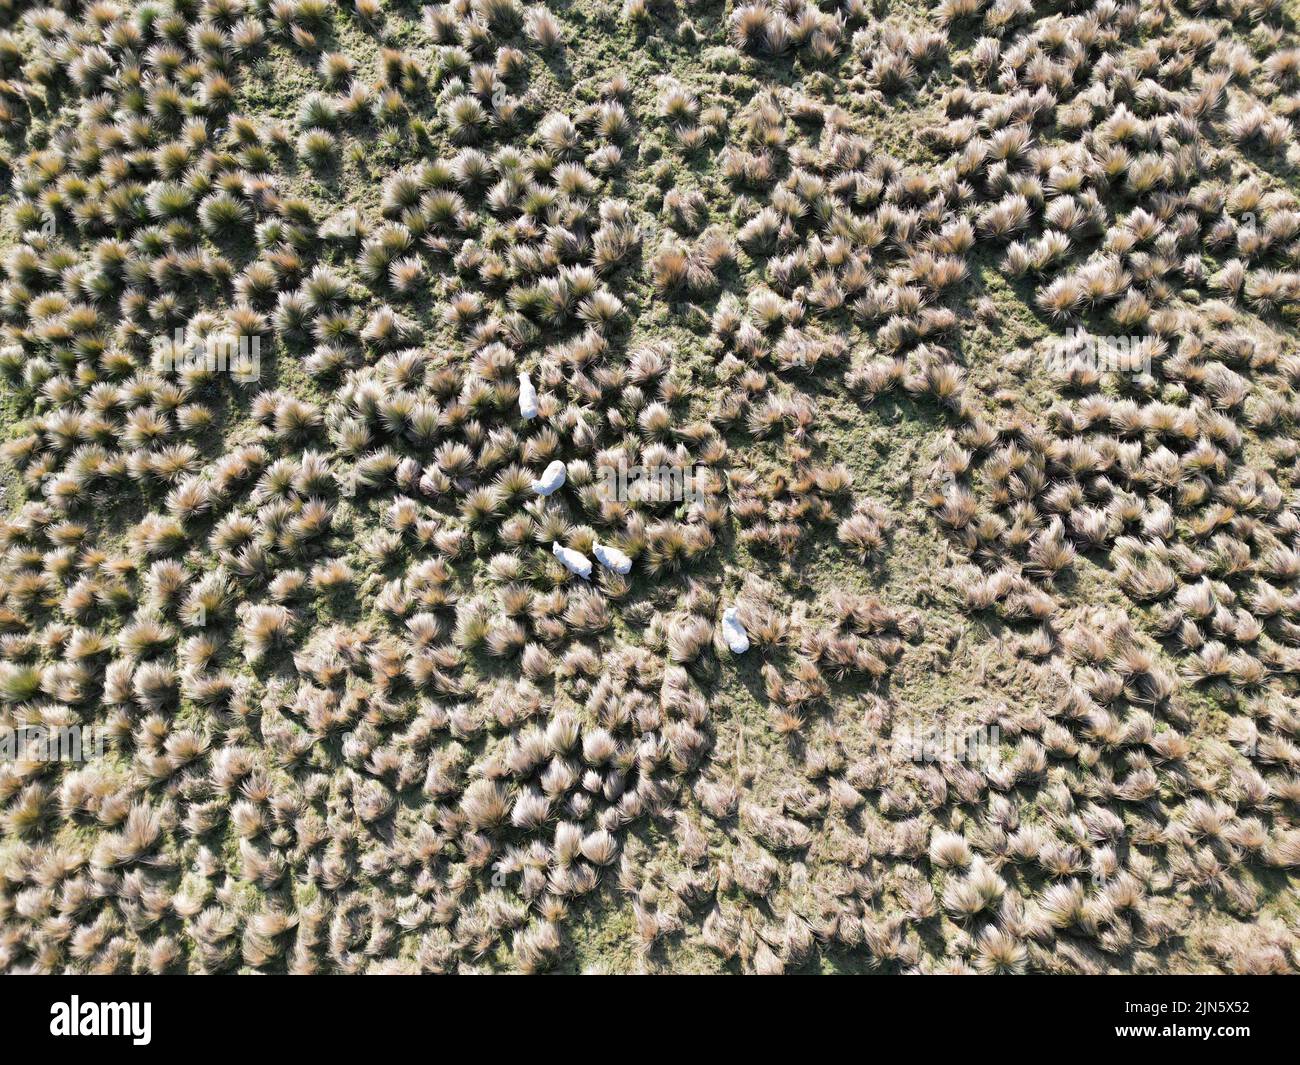 A top view of a small herd of white sheep grazing in clearing among the bushes Stock Photo